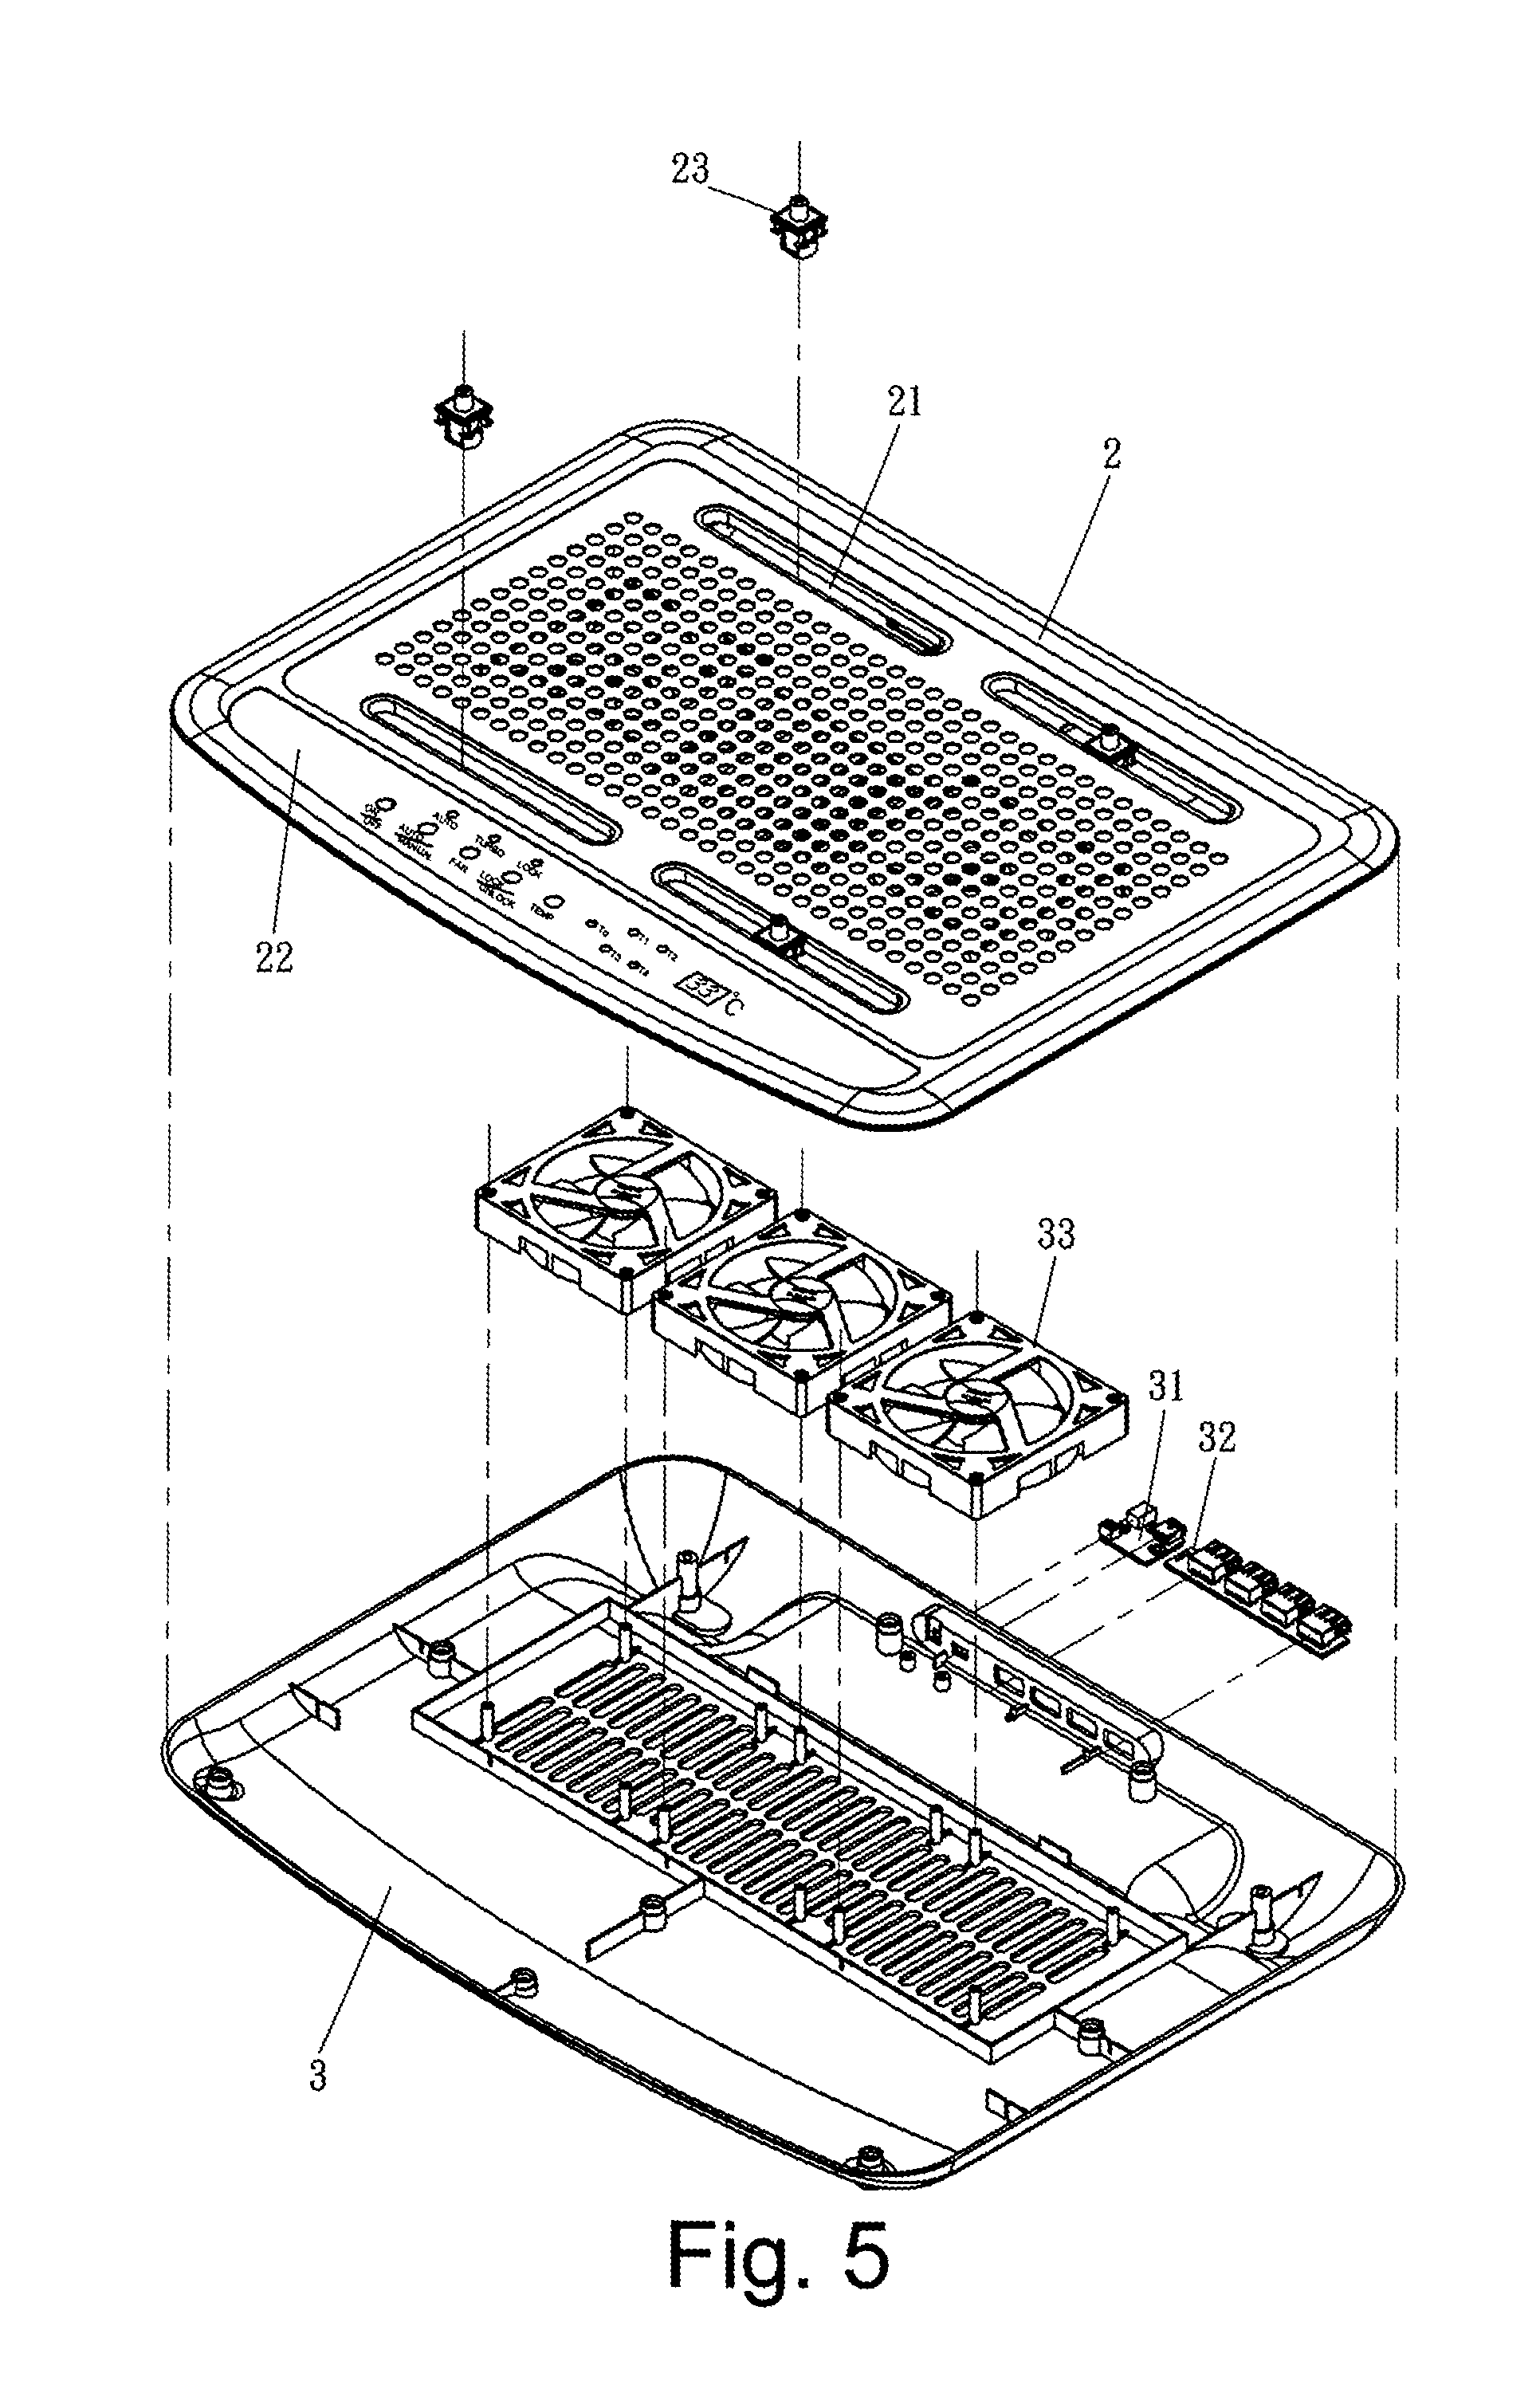 Notebook computer cooling pad capable of temperature detection and fan-speed adjustment